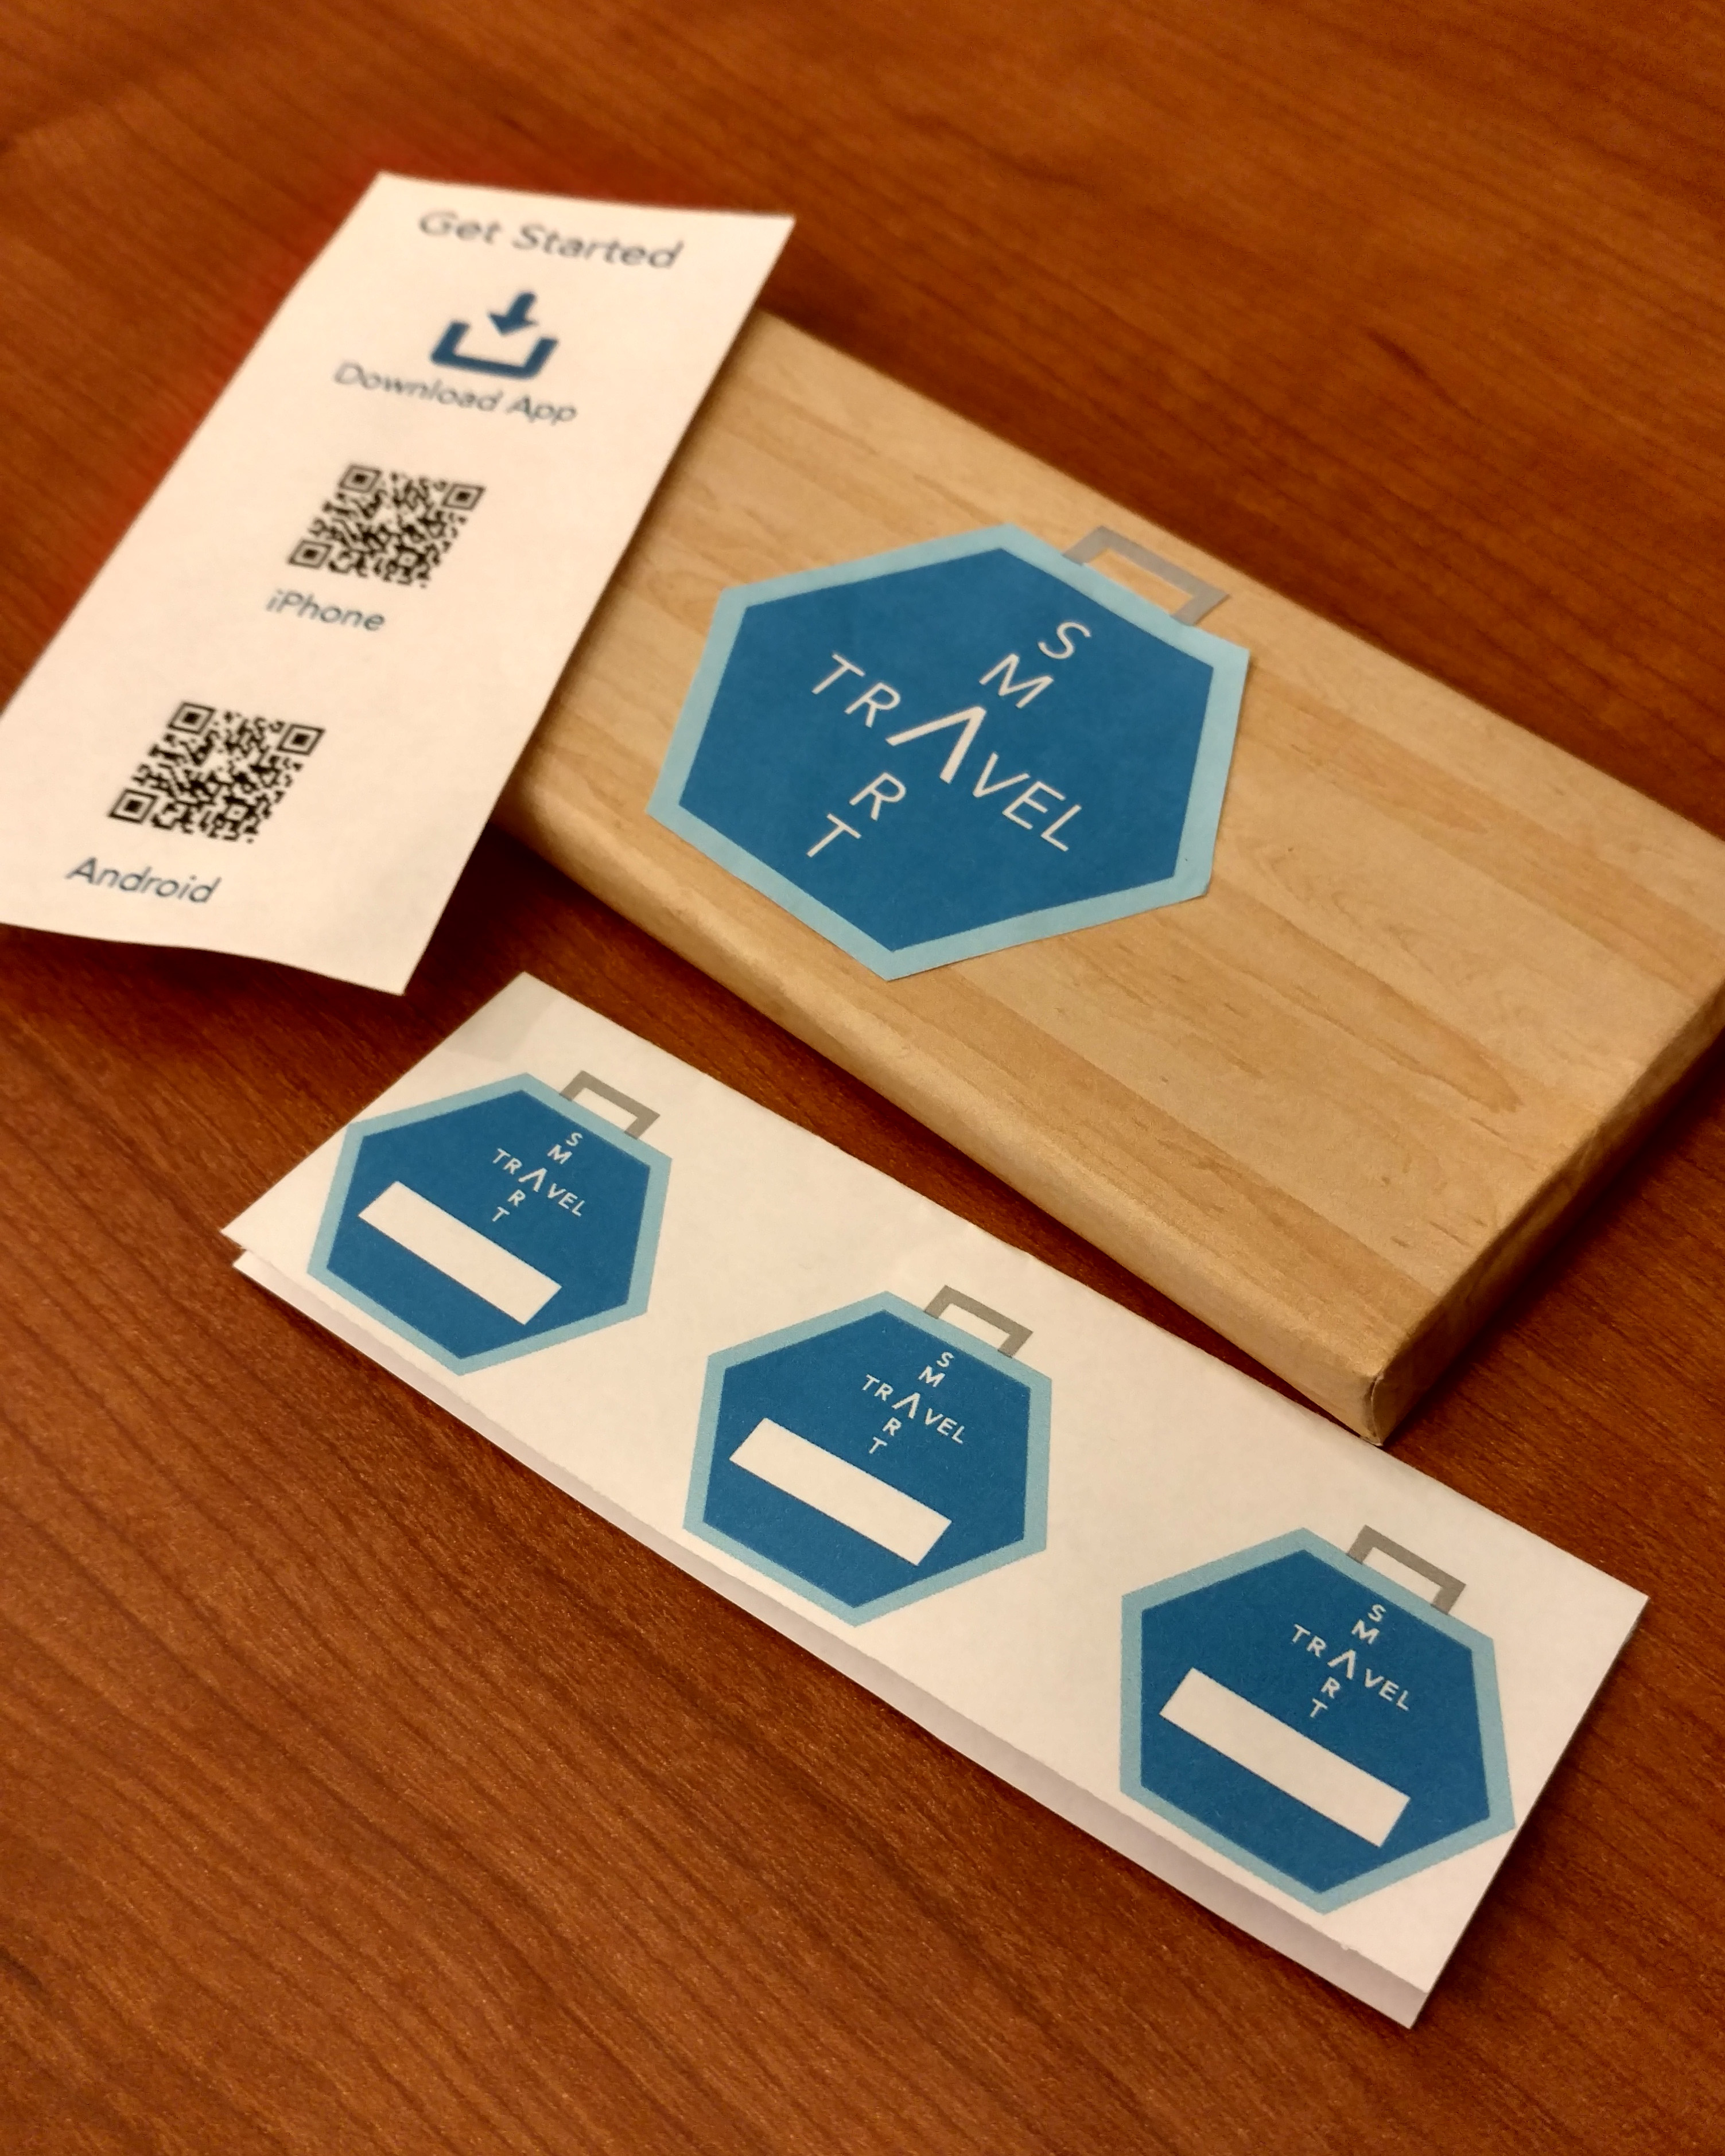 Image of physical design of the stickers and hub